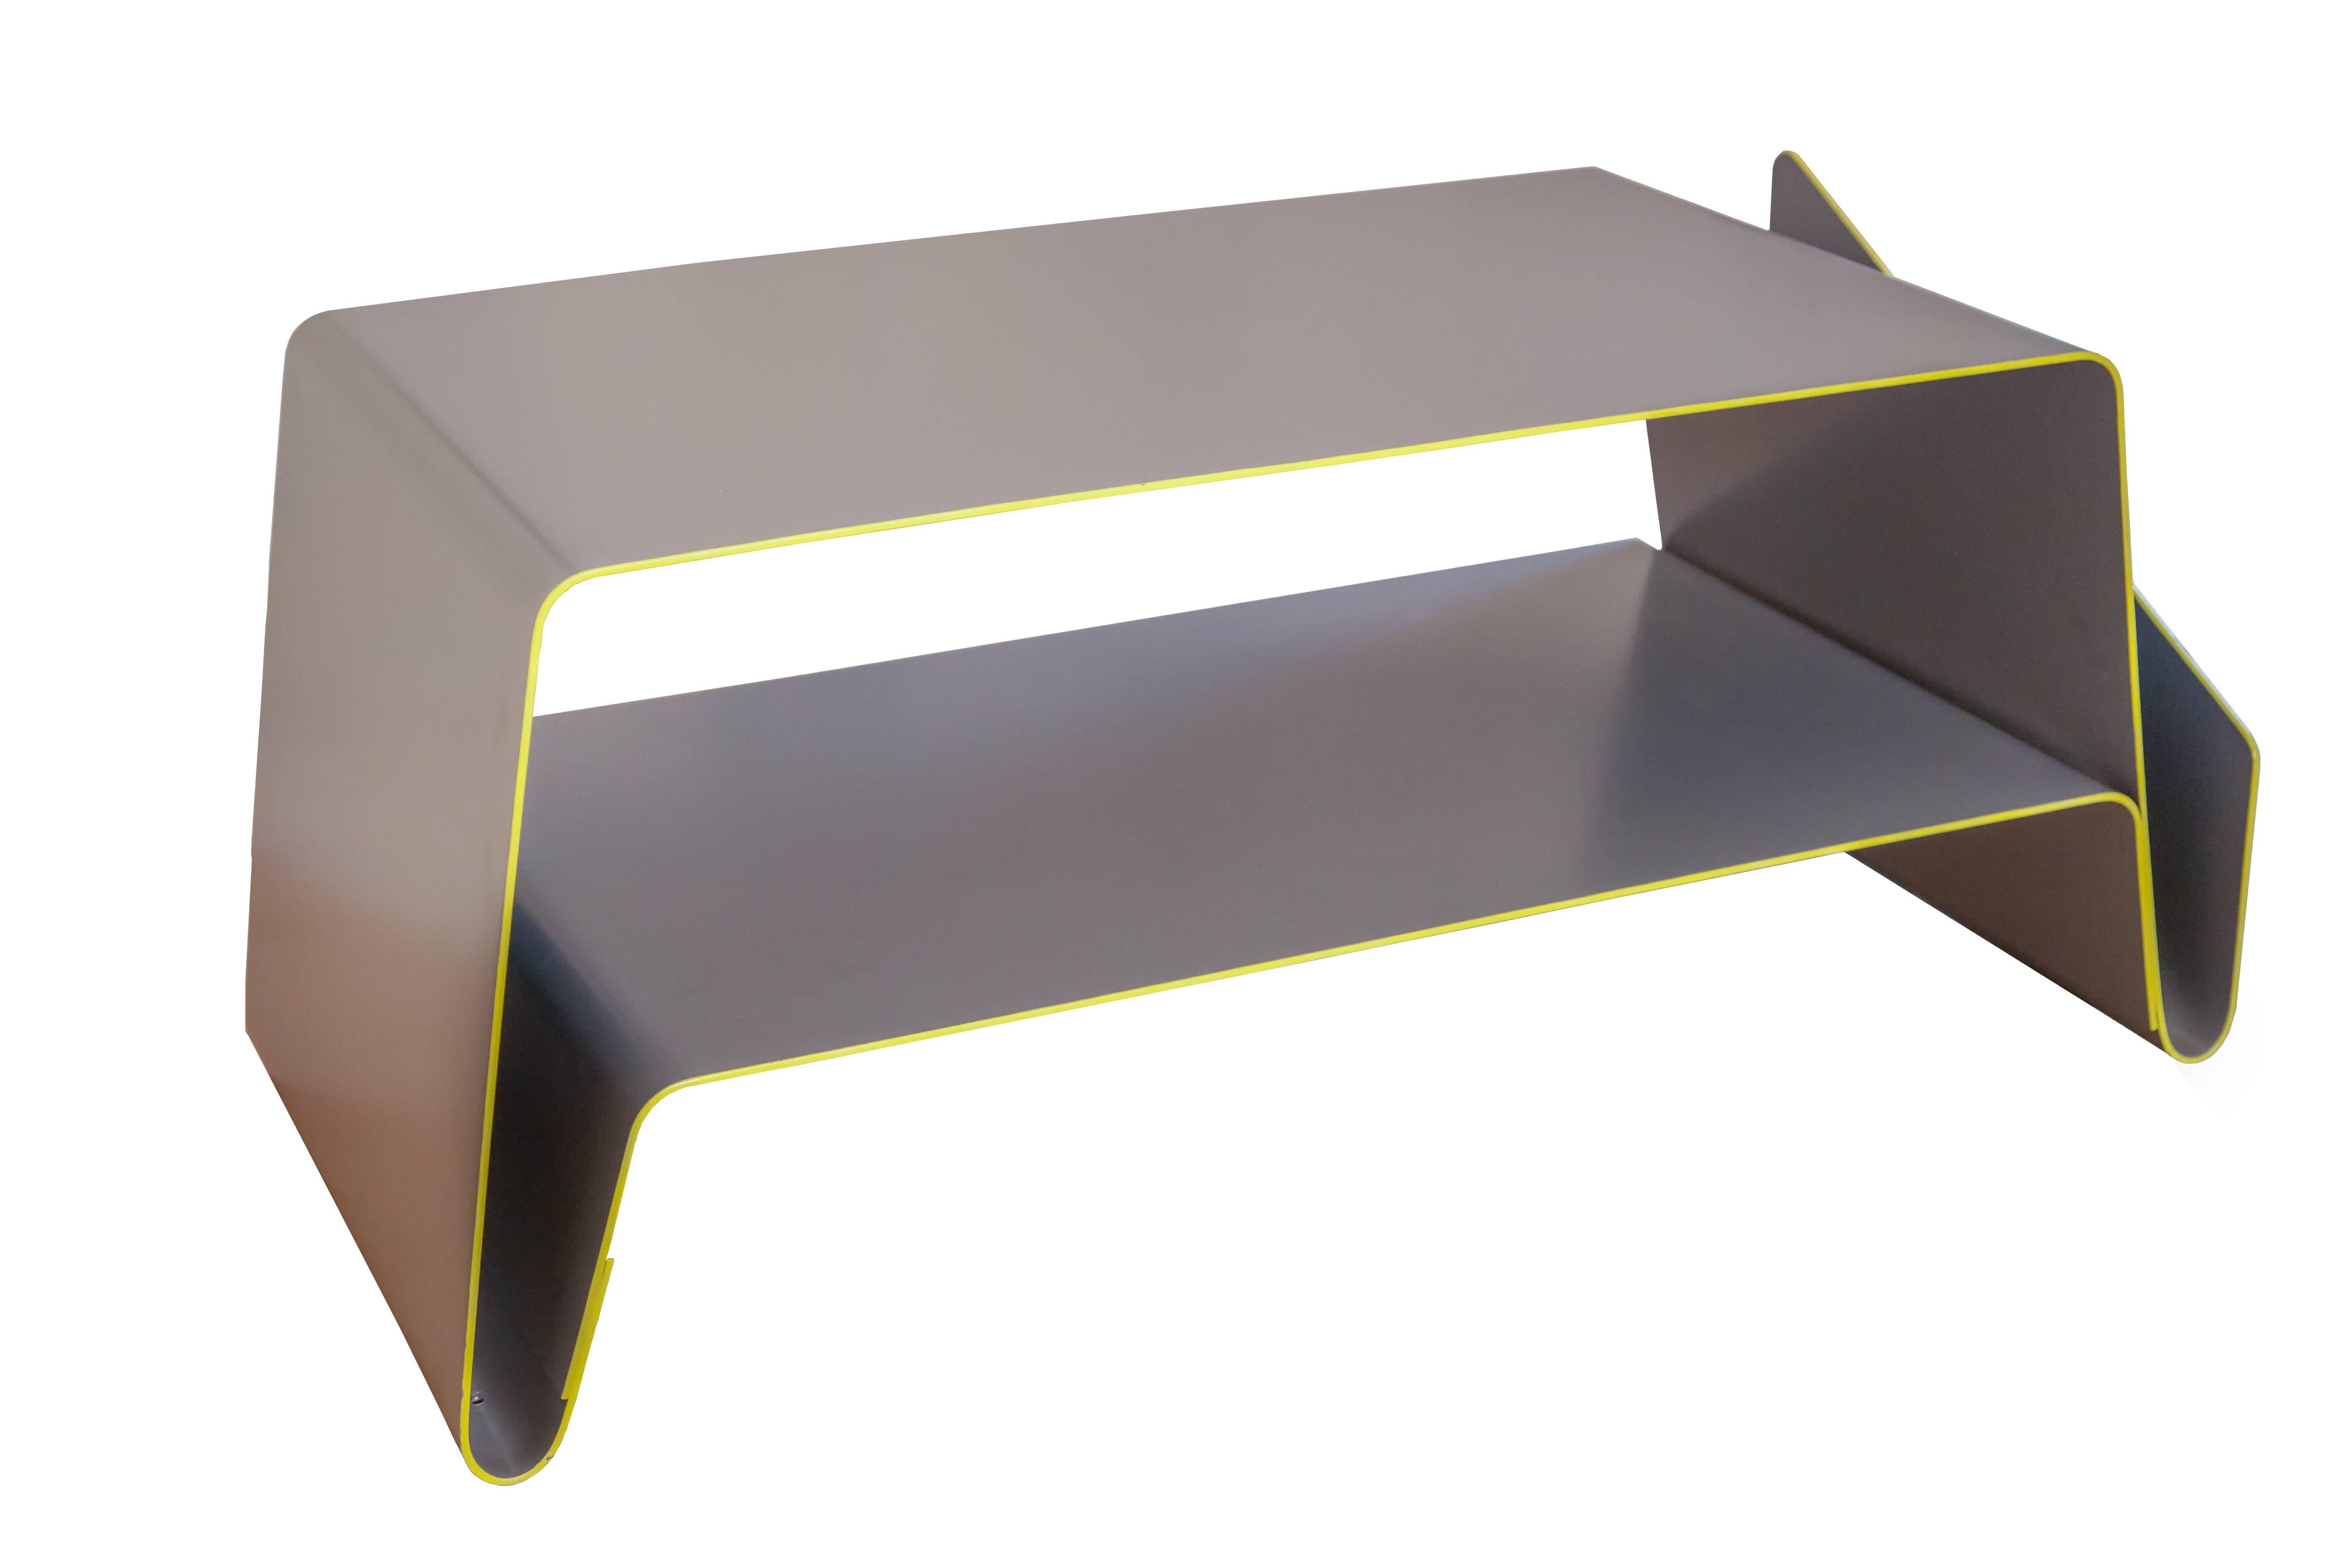 A stylish and practical modern table which uses colour to highlight the softness of its lines and curves. The structure is made of aluminium to create that smooth Minimalist surface. Every corner is smooth and rounded, creating a flowing unique